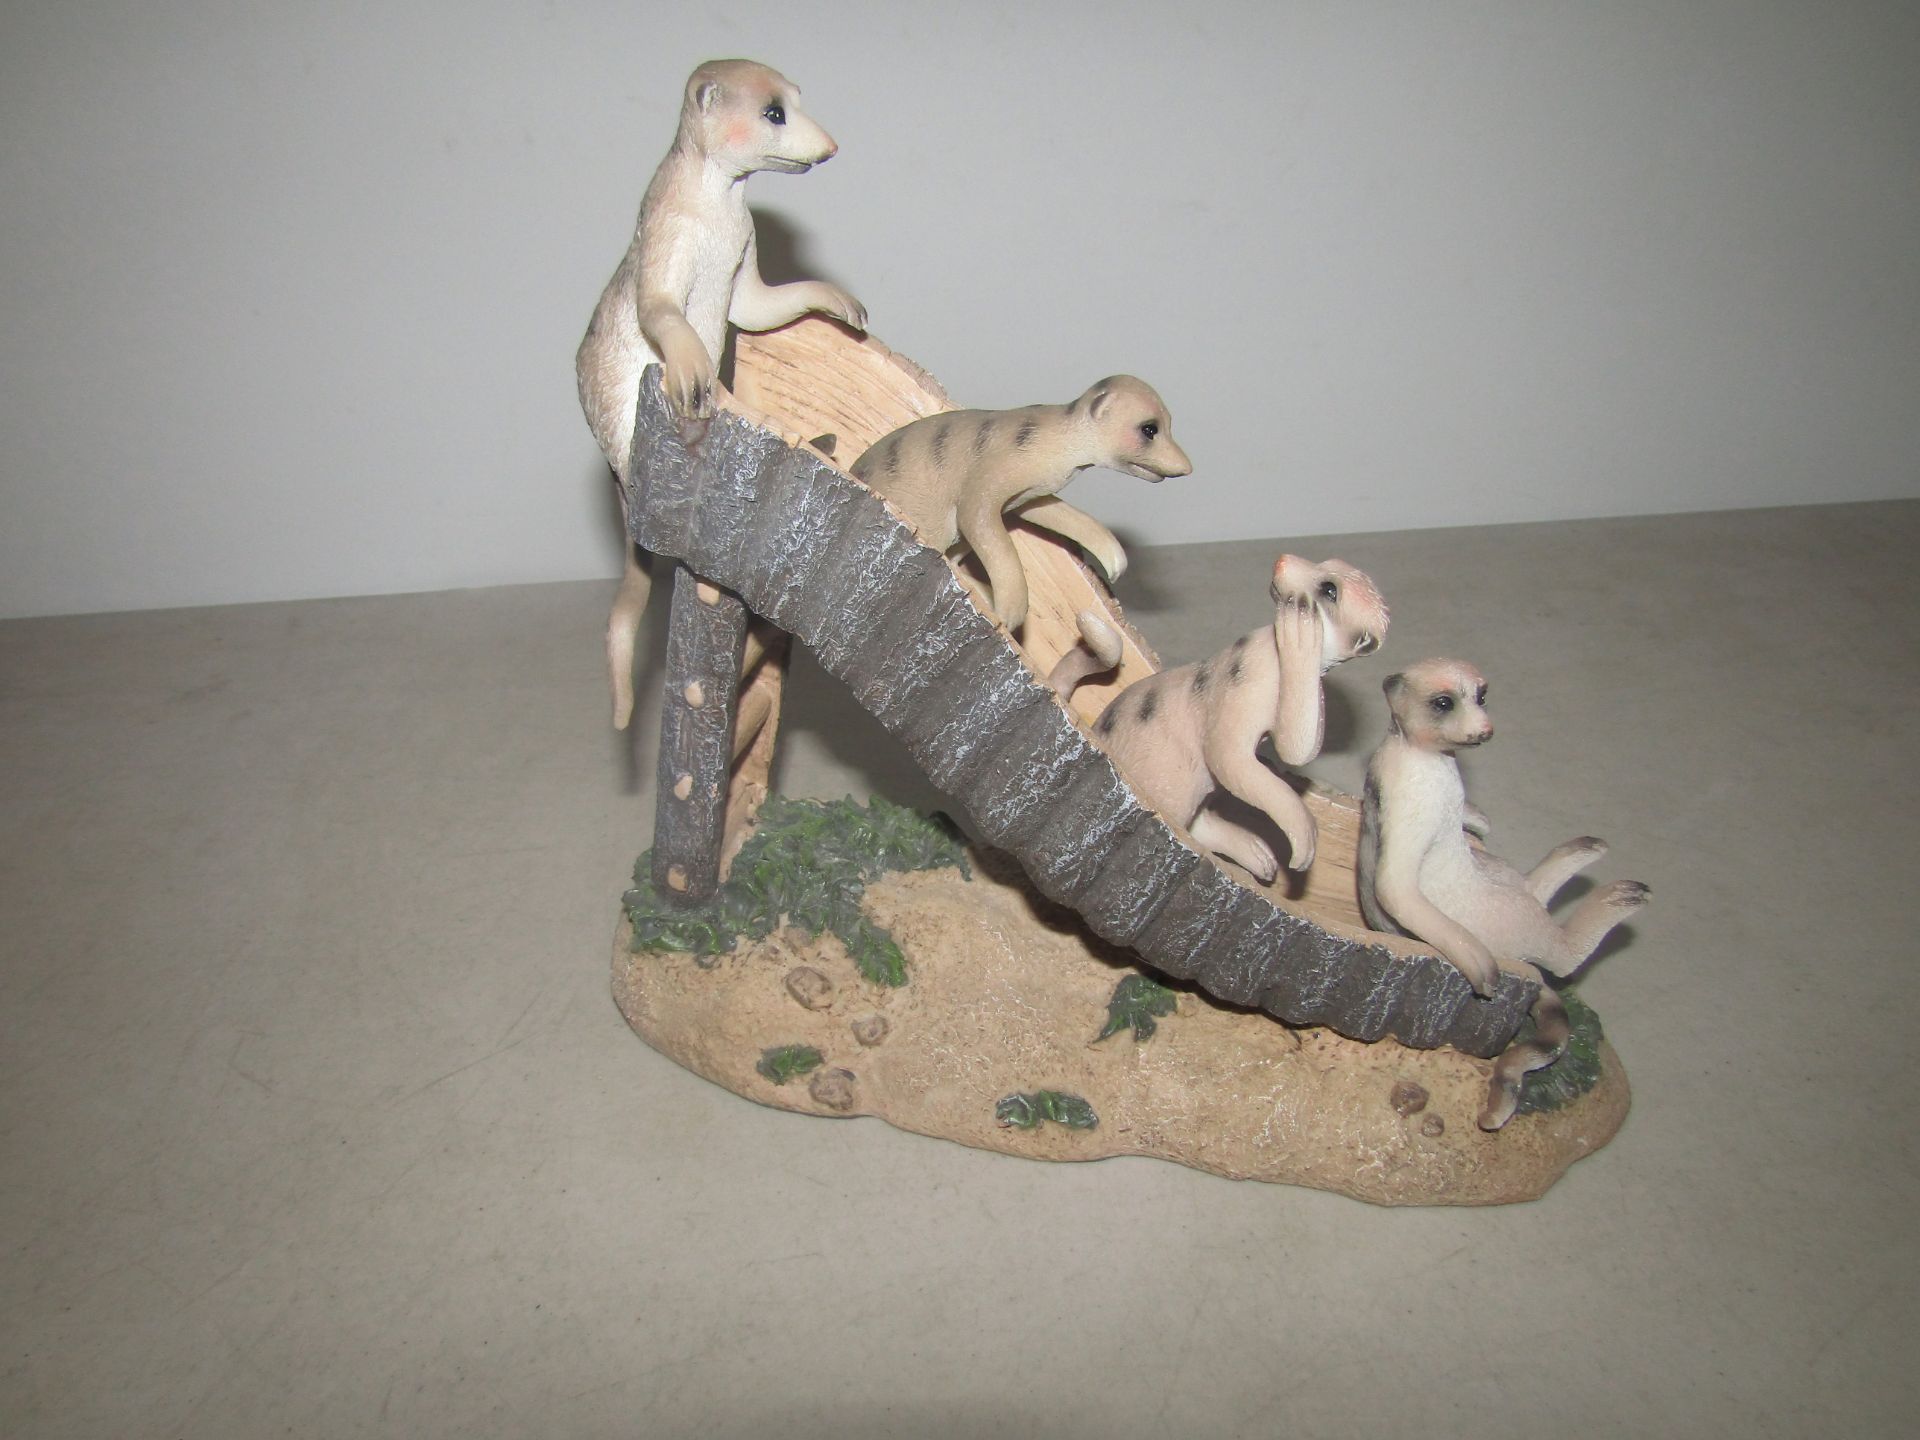 Meerkat slide garden ornament, unchecked and boxed.